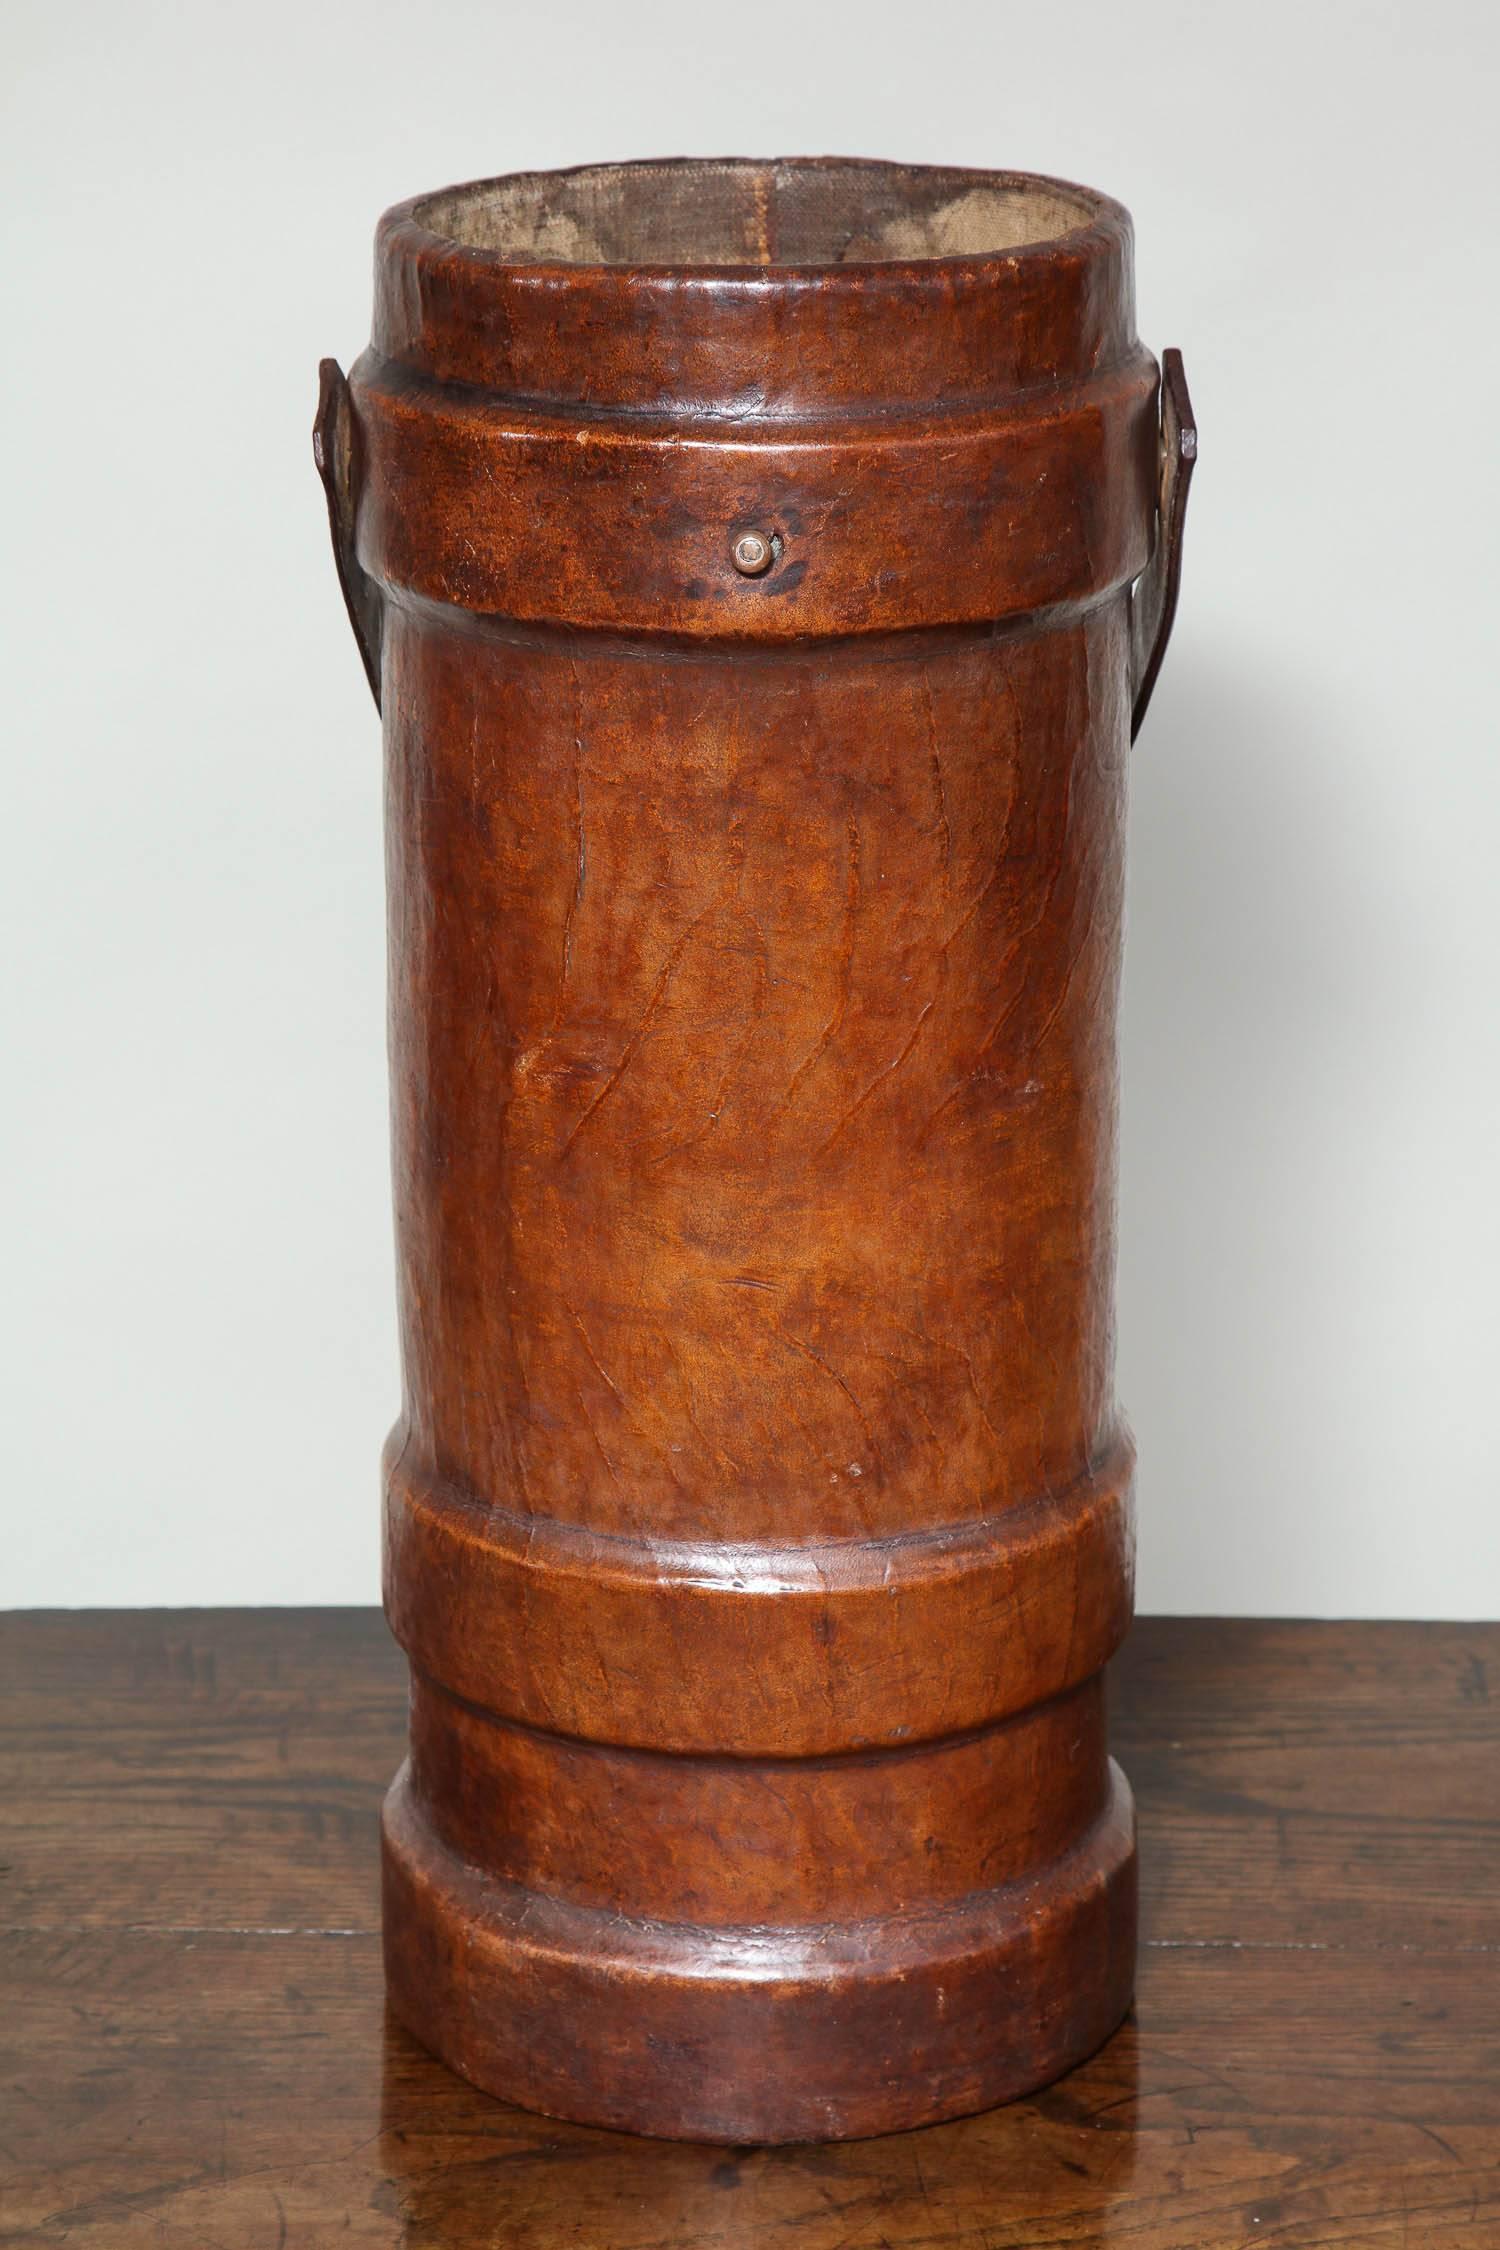 Fine English late 19th century leather cordite carrier, having original carrying handle and the whole with good rich color. Ideal as an umbrella holder or stick stand.

Measures: Height 24